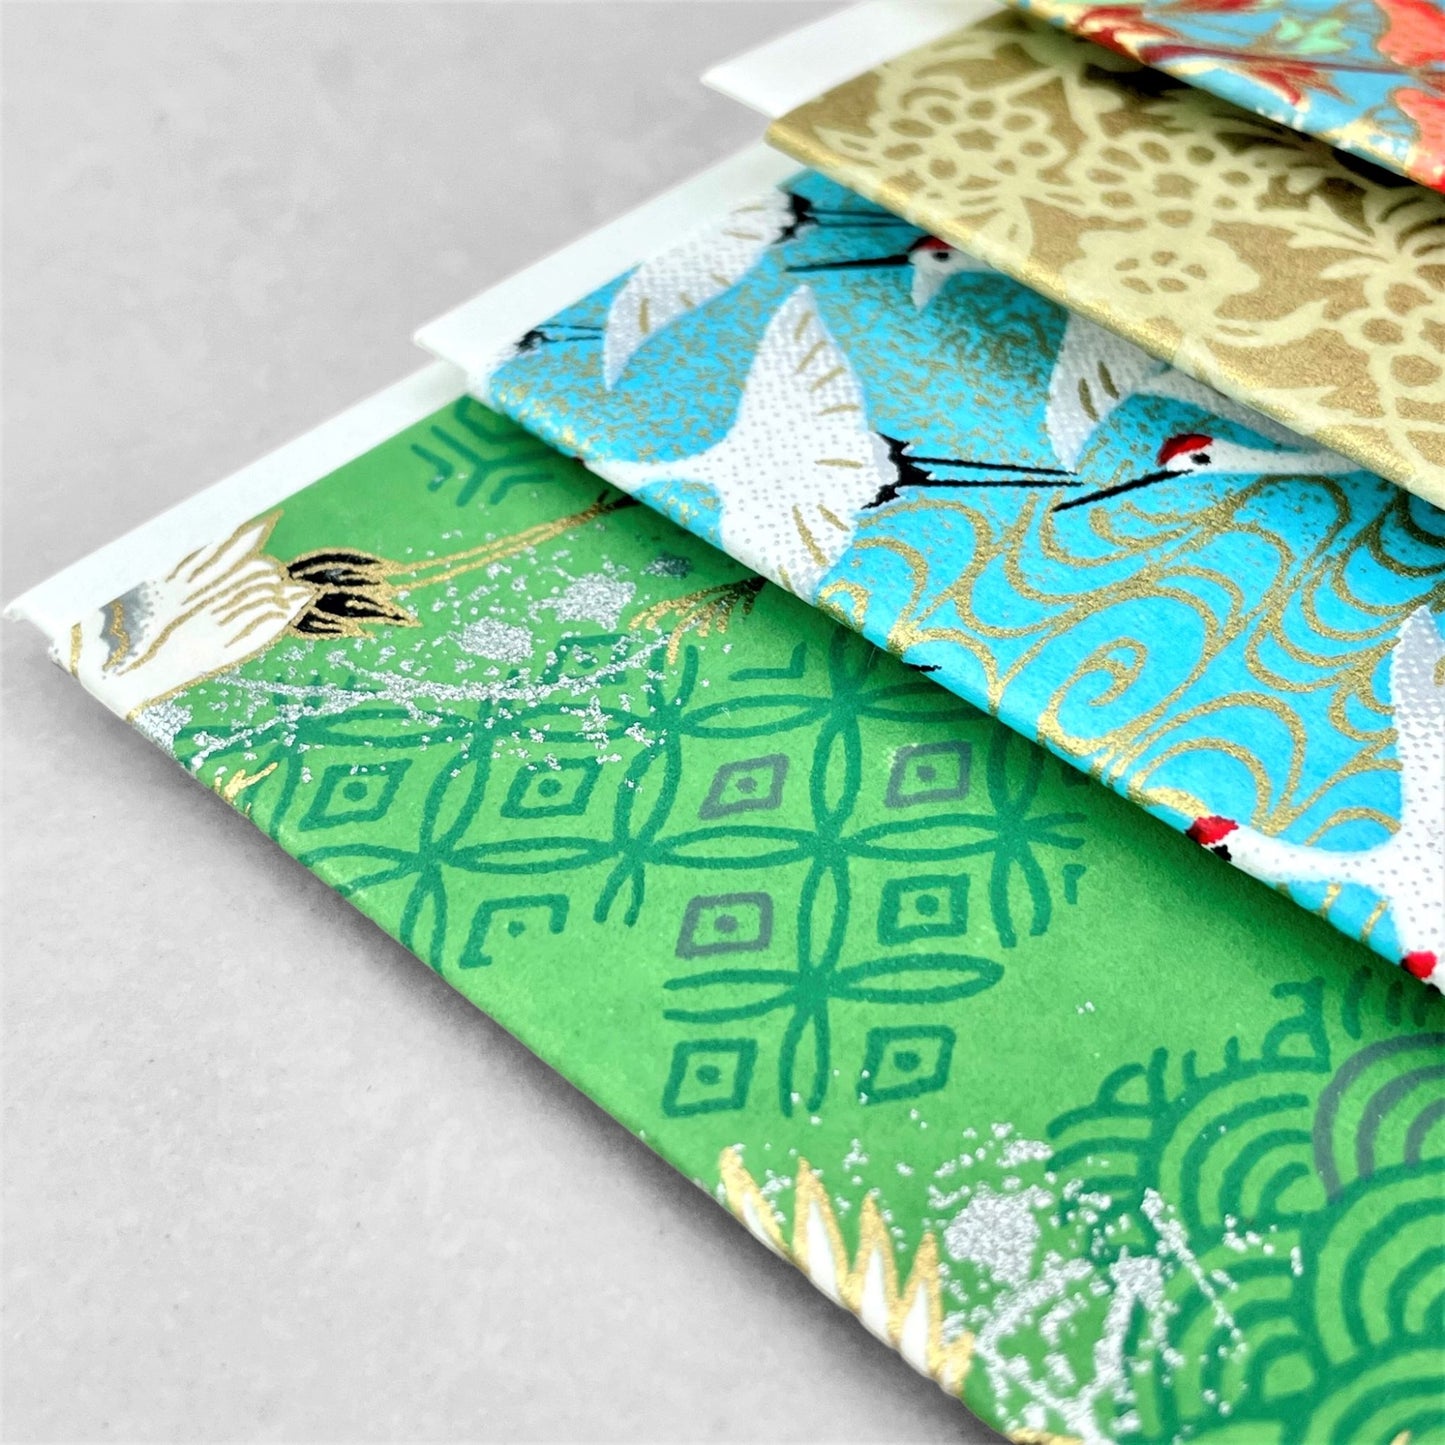 japanese silk-screen printed greetings card with a pattern of white cranes in flight on a green backdrop of japanese motifs by Esmie